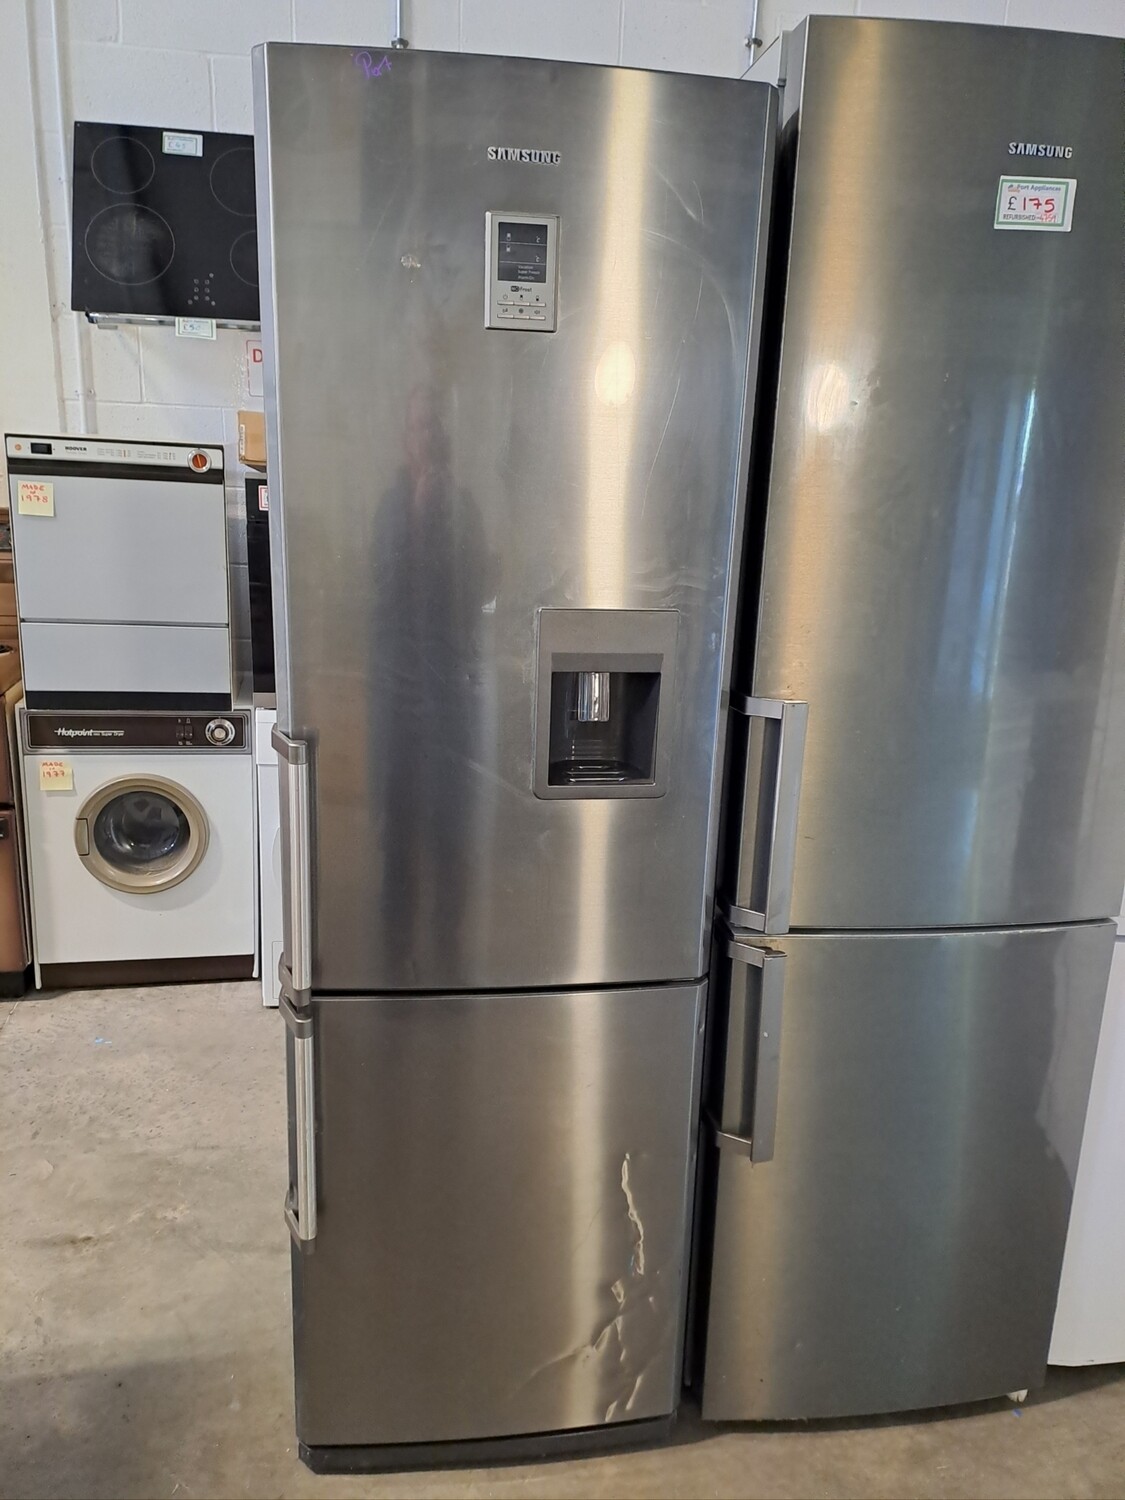 Samsung RL41WGIH Fridge Freezer Grey Stainless H192 x W60 x D66 Refurbished. This item is located in our Whitby Road Shop 